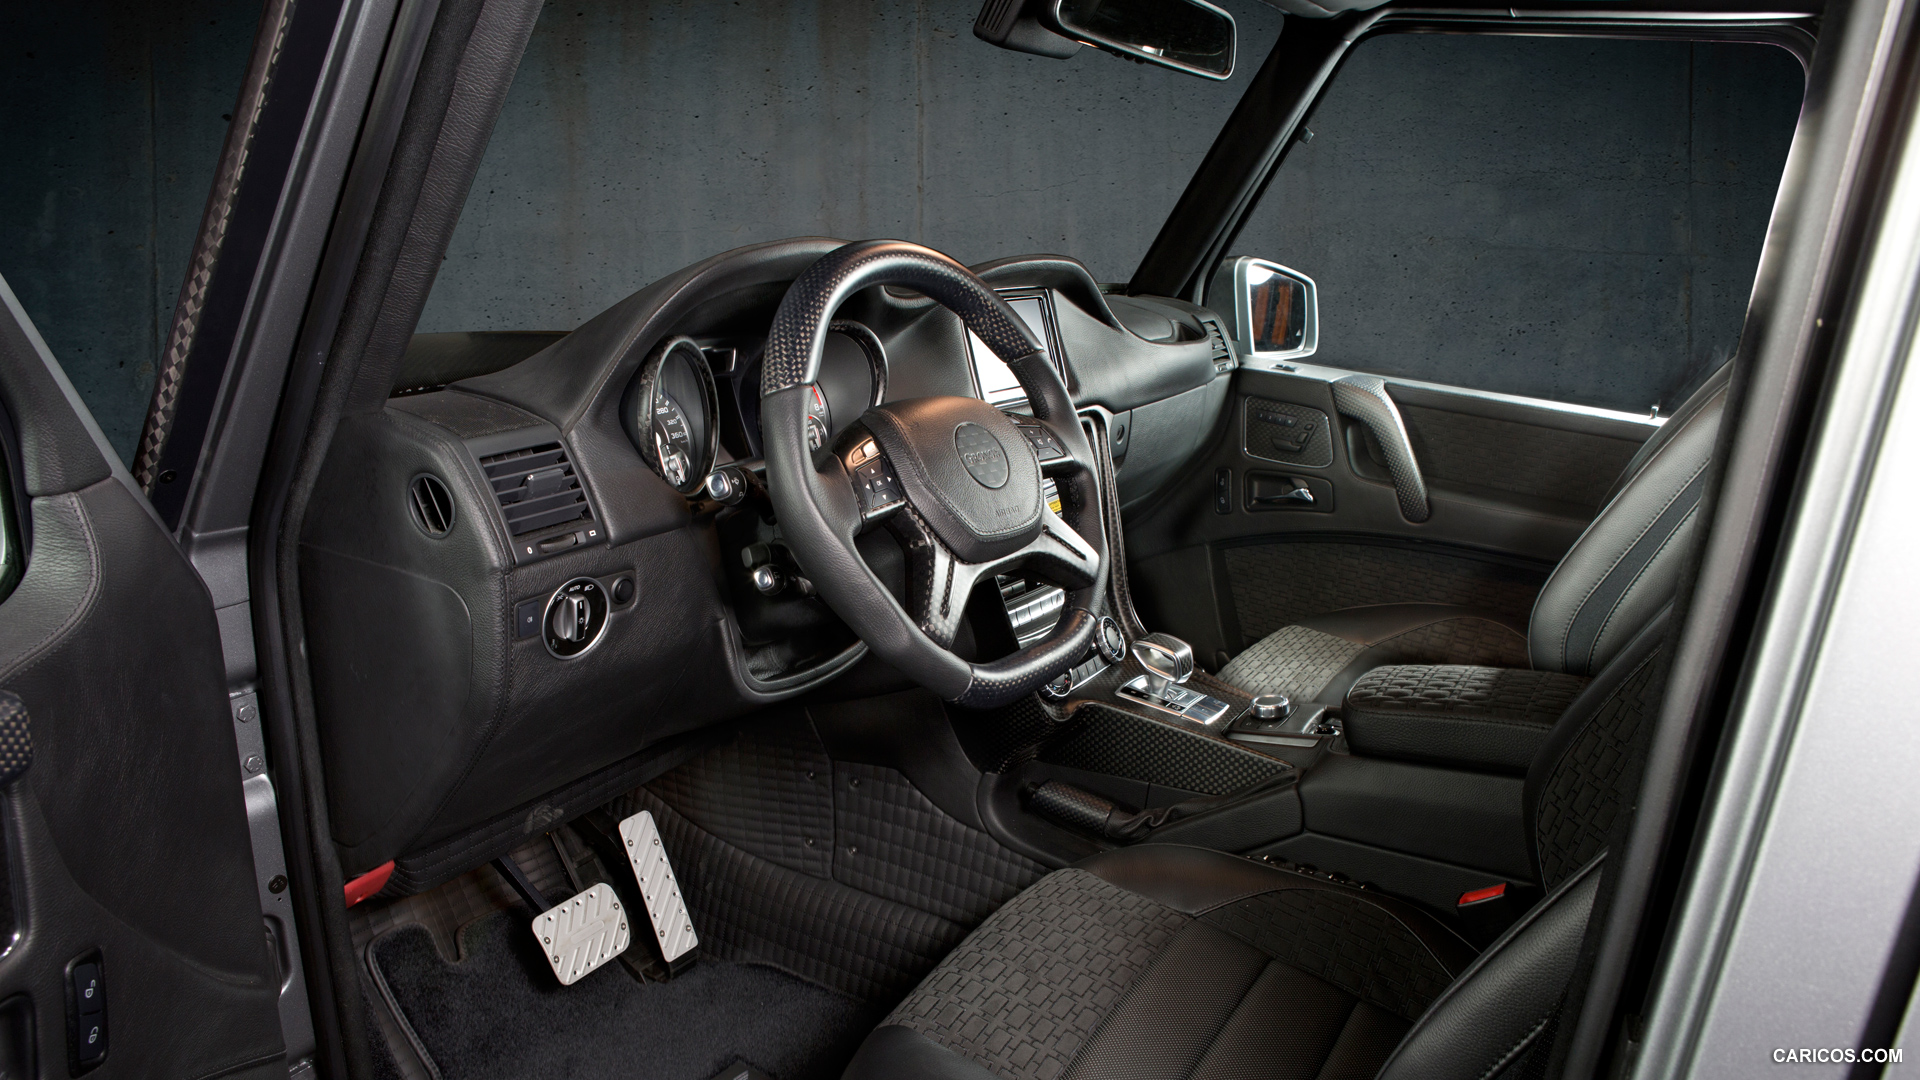 2014 Mansory Gronos based on Mercedes-Benz G-Class AMG  - Interior, #3 of 6